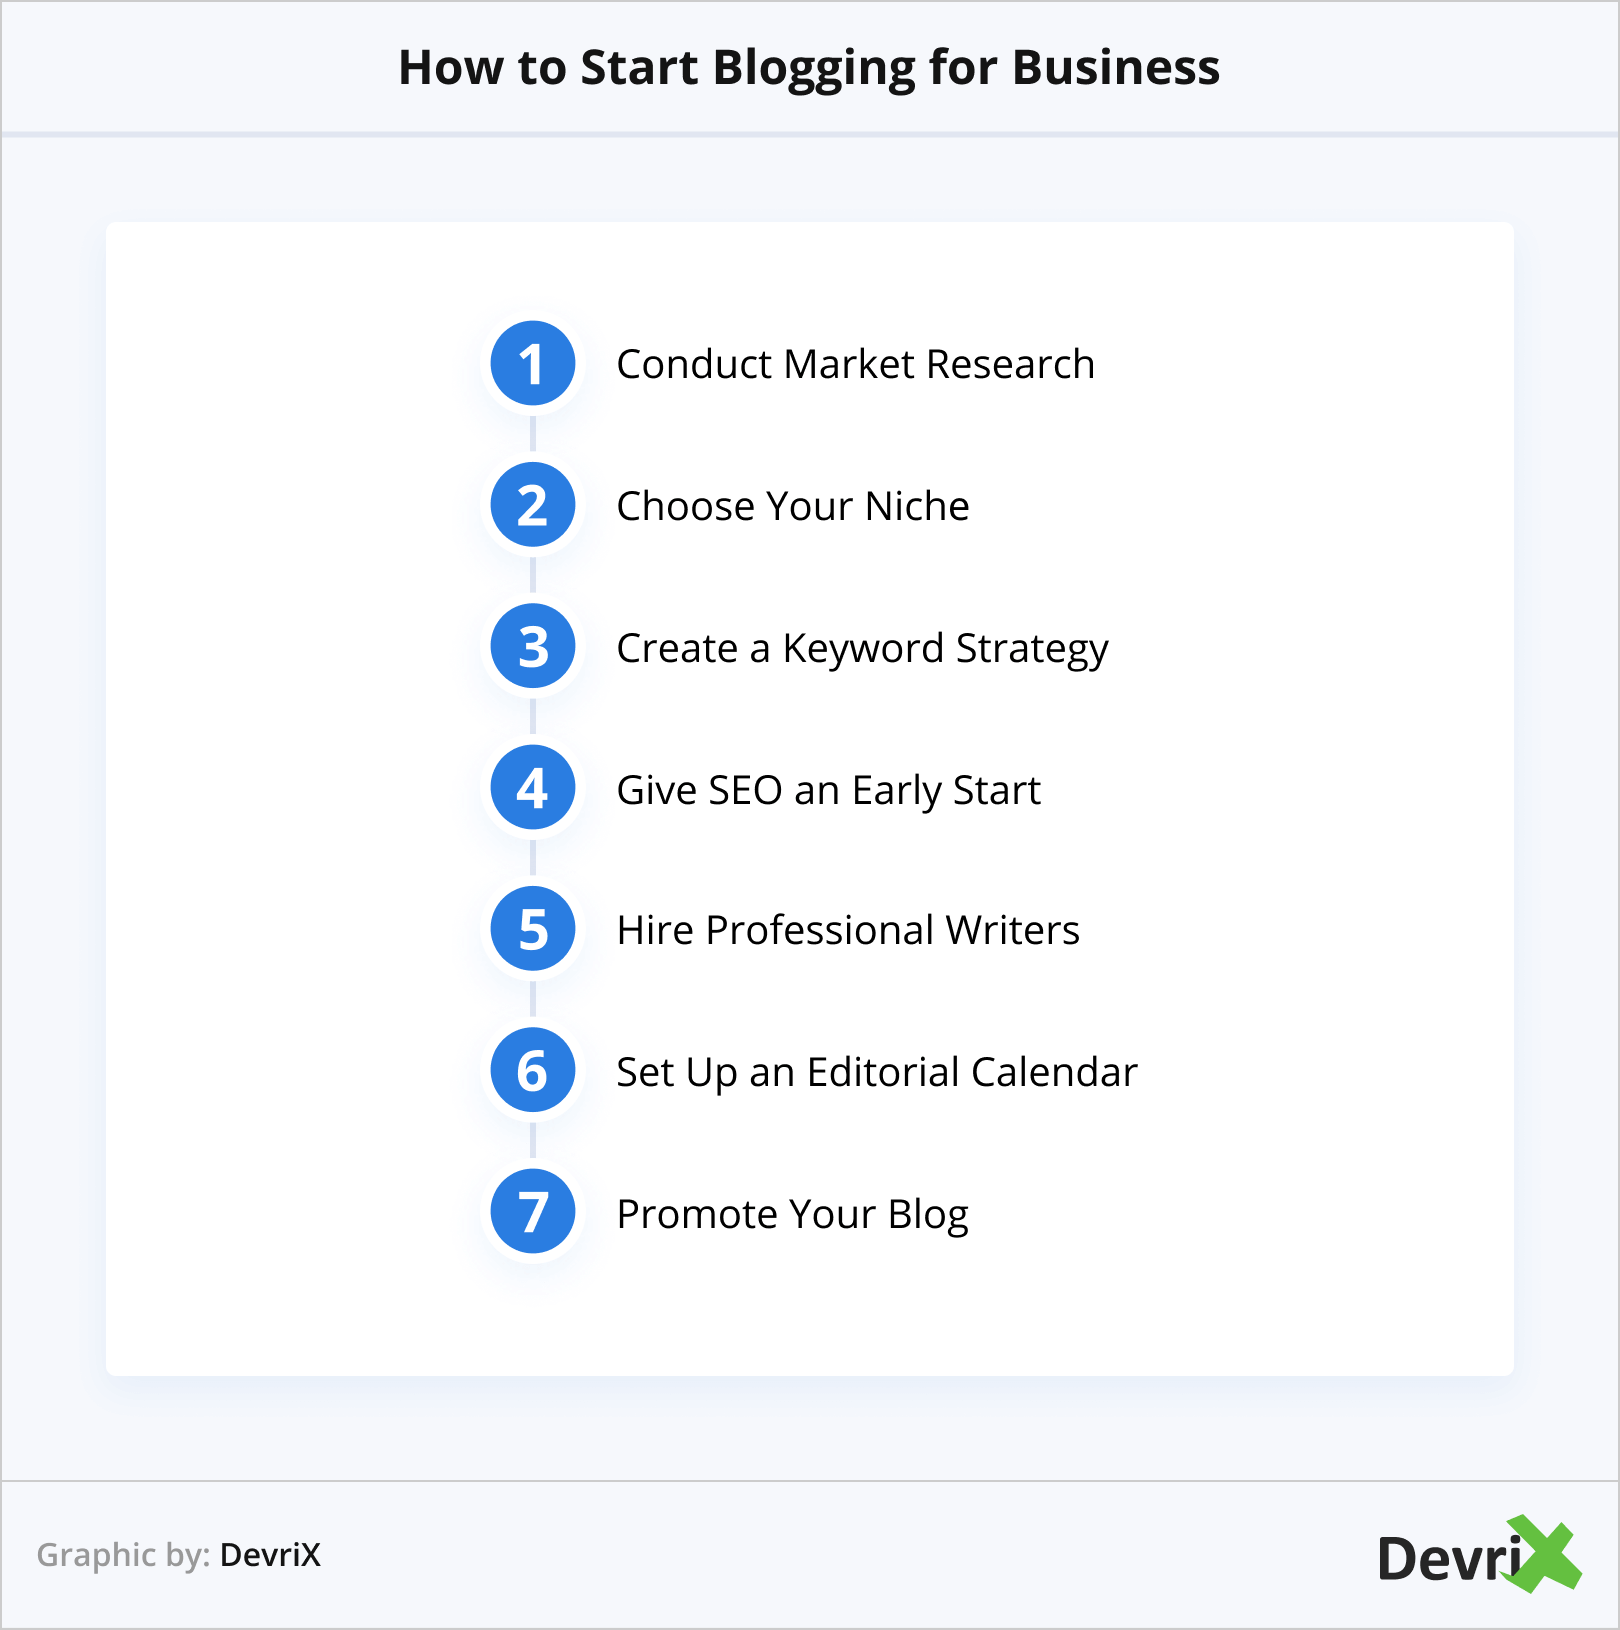 How to Start Blogging for Business